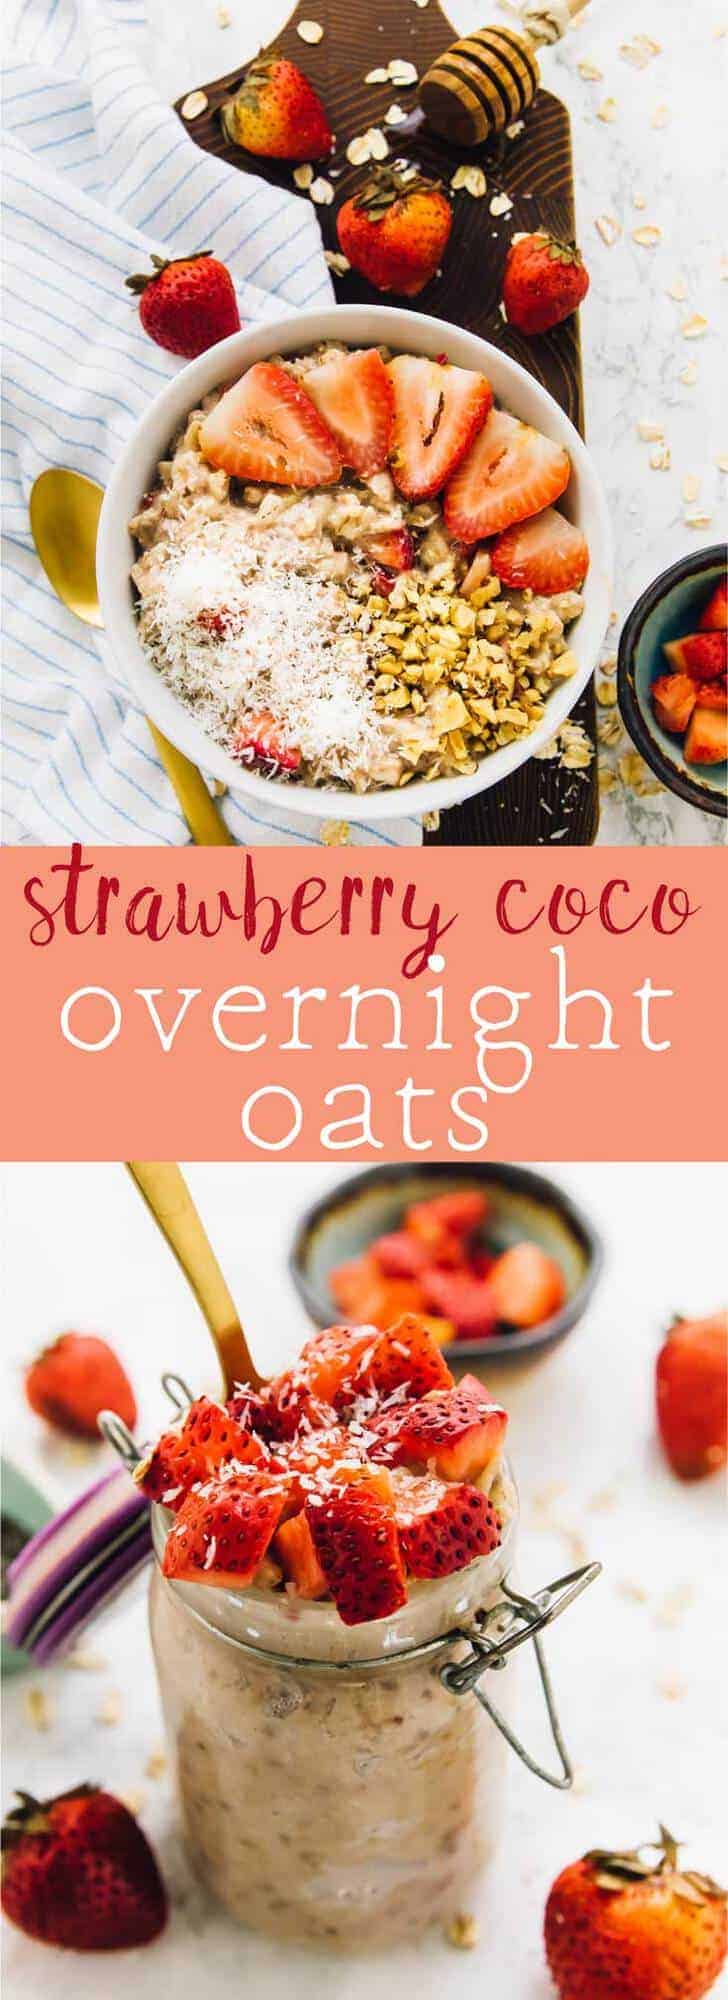 These Strawberry Coconut Overnight Oats are the easiest breakfast ever! They require only 5 minutes of prep and are delicious, filling and so nutritious! They are perfect for meal prep! via https://jessicainthekitchen.com